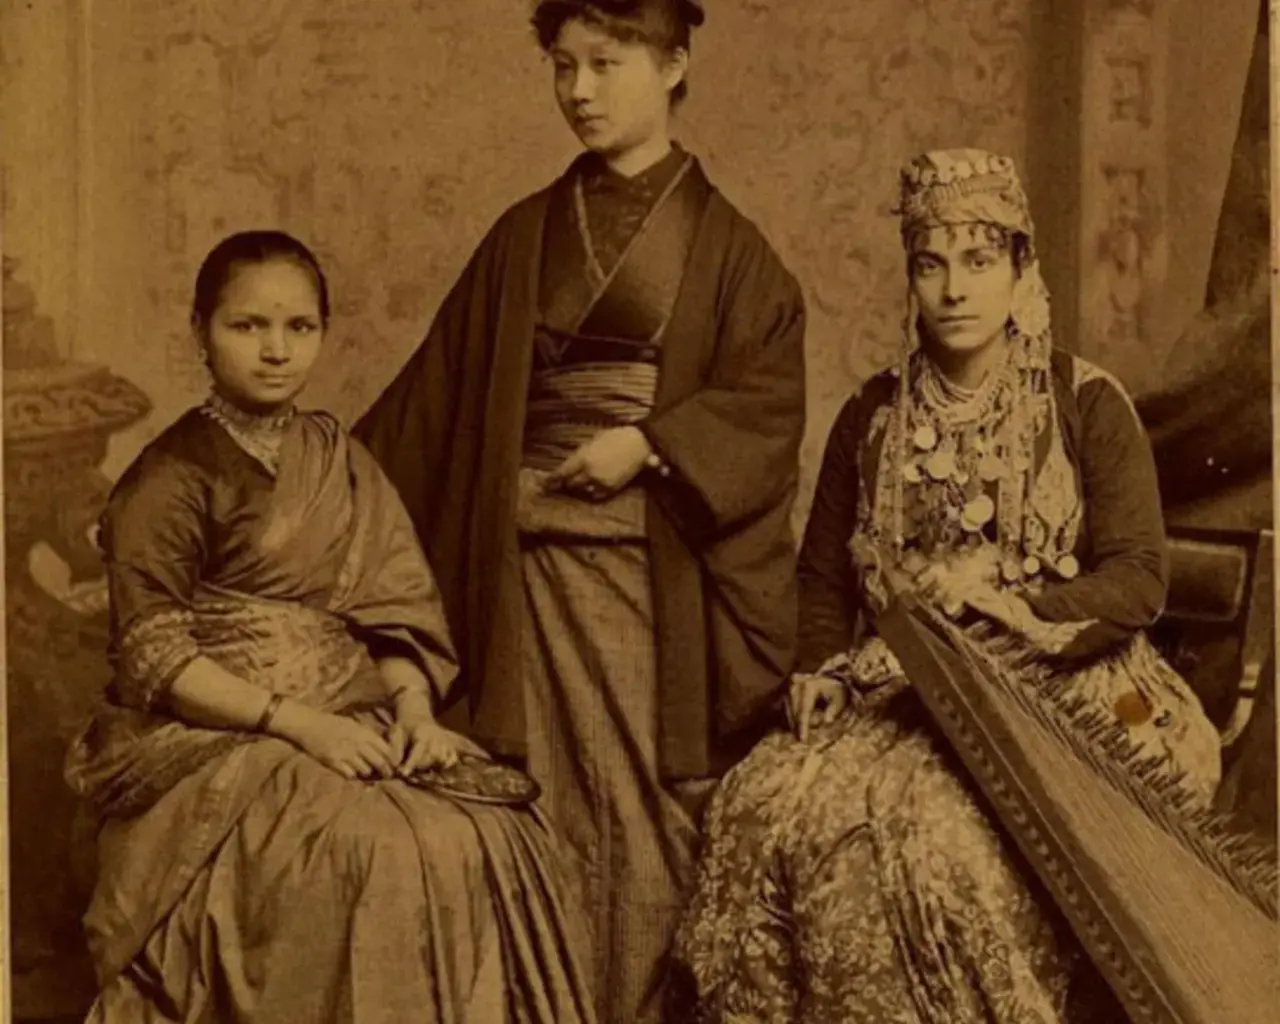 A memento of the dean&#39;s reception, held October 10, 1885. From left to right: Anandibai Joshee (India) graduated from the Woman&#39;s Medical College of Pennsylvania (WMC) in 1886; Kei Okami (Japan) graduated from WMC in 1889; Sabat Islambooly (Syria) graduated from WMC in 1890. Image courtesy of the Drexel University College of Medicine Legacy Center&rsquo;s Archives and Special Collections.